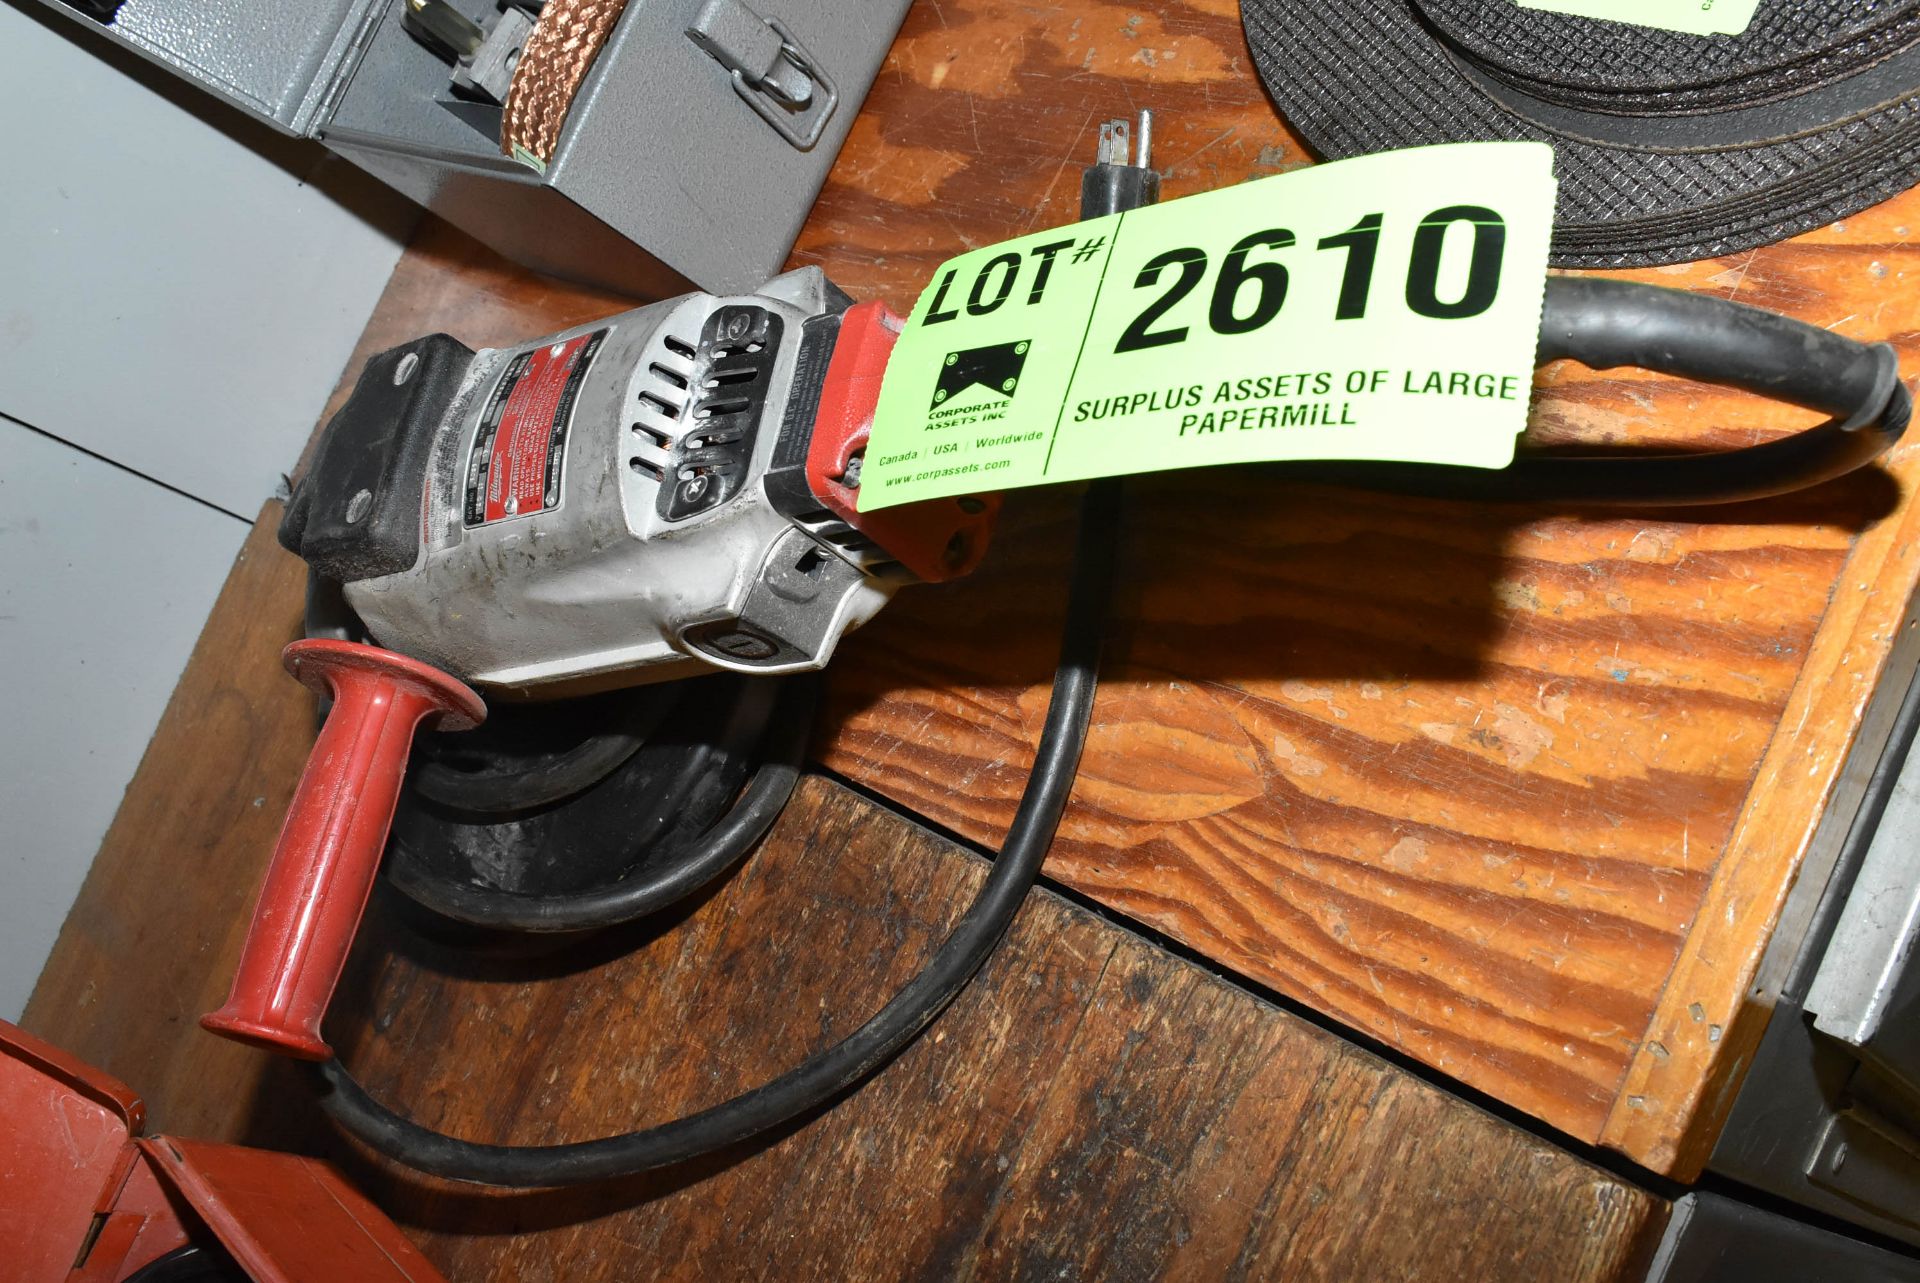 MILWAUKEE 9" ELECTRIC ANGLE GRINDER/SANDER [RIGGING FEE FOR LOT #2610 - $TBD USD PLUS APPLICABLE